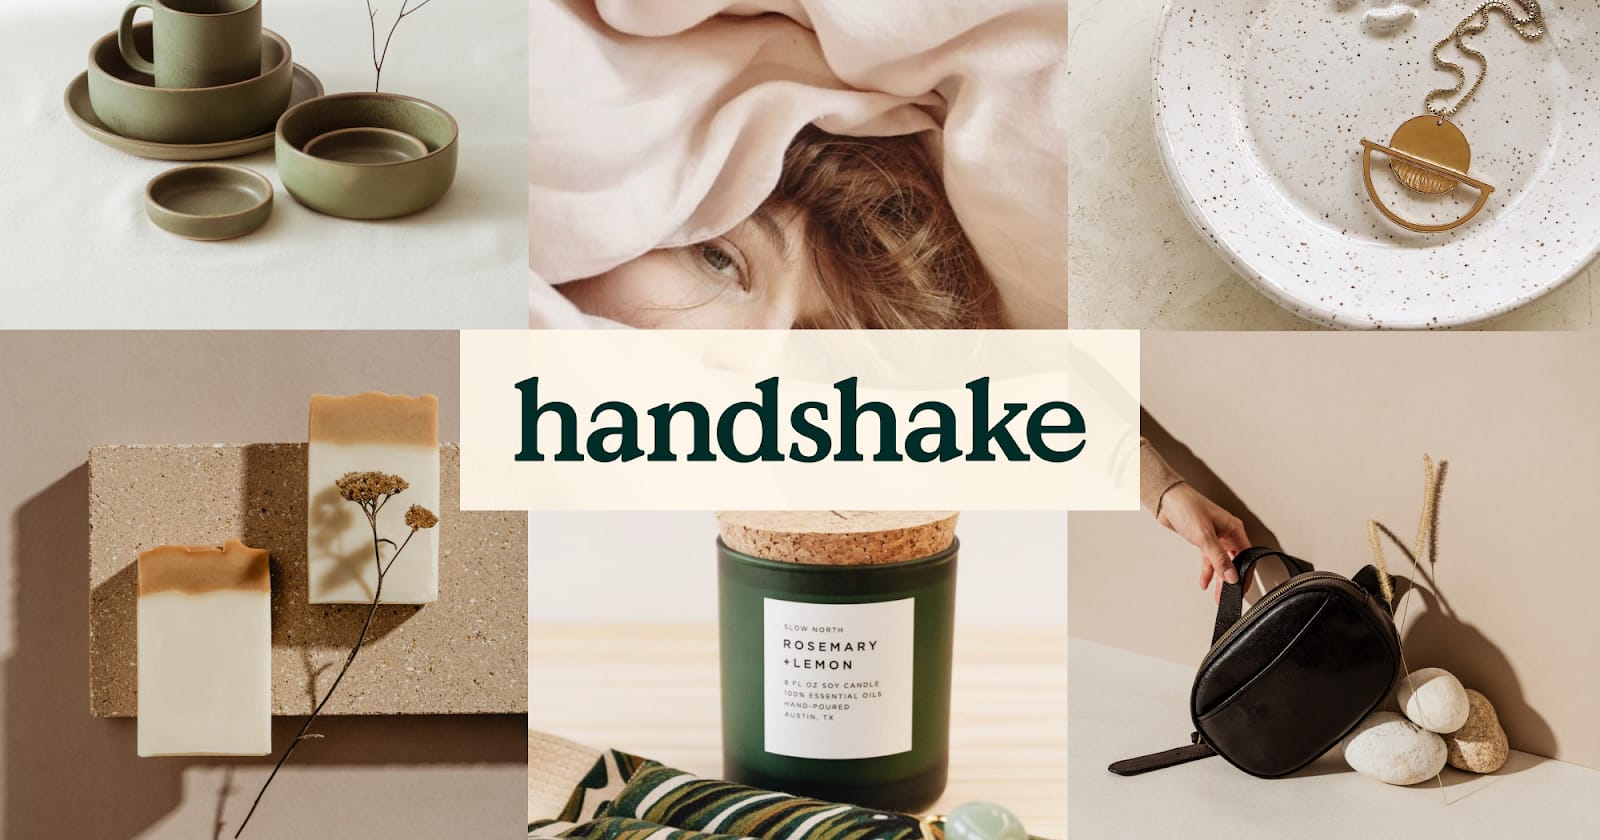 Handshake homepage with fashion accessories and apparel, homewares, stationery in background.